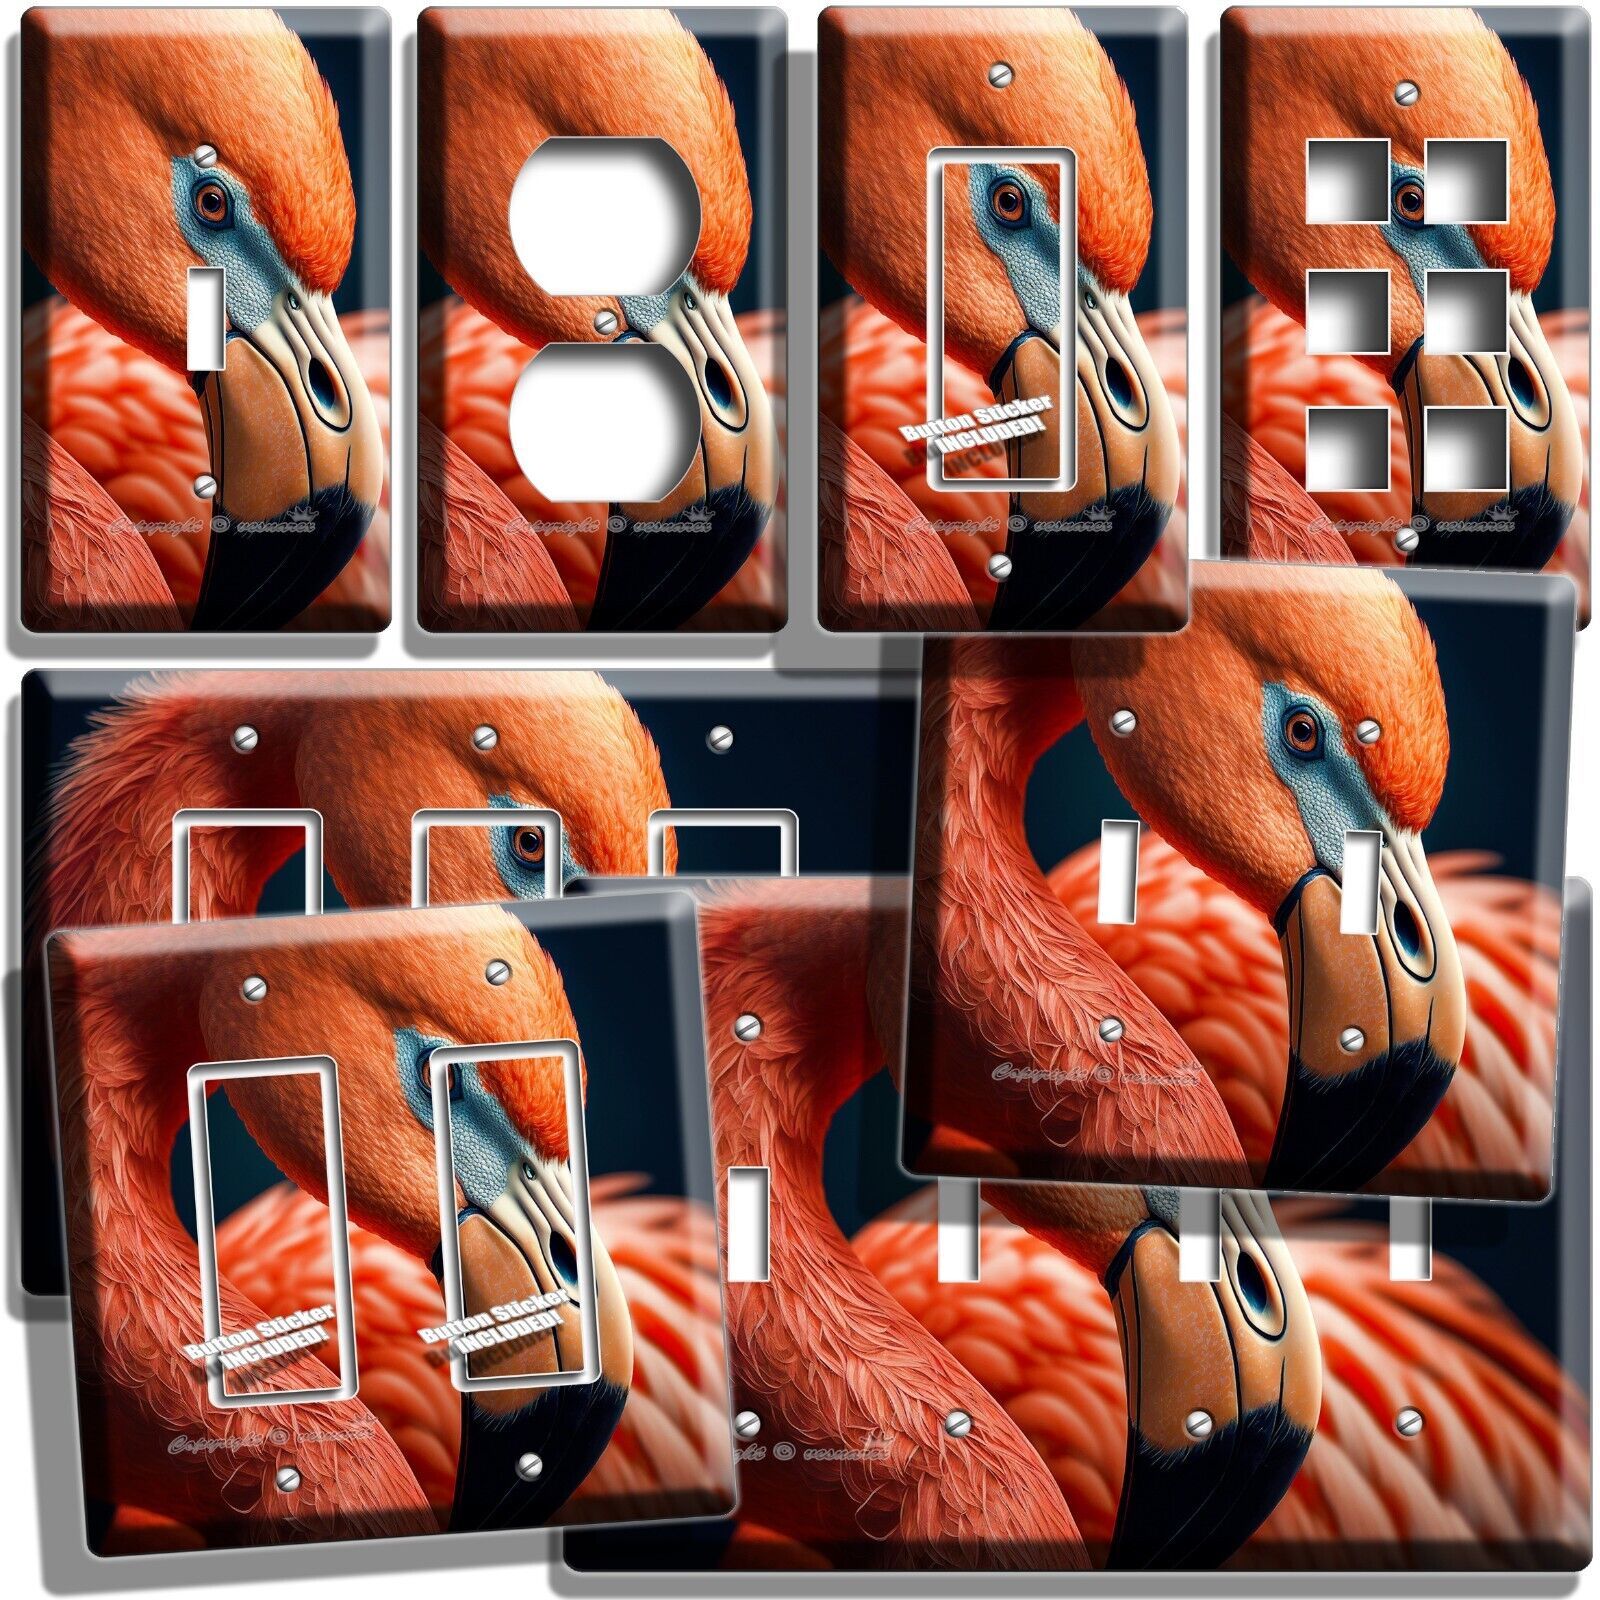 PINK FLAMINGO HEAD LIGHT SWITCH OUTLET WALL PLATE WILD NATURE HOME ROOM HD DECOR - $11.03 - $27.59